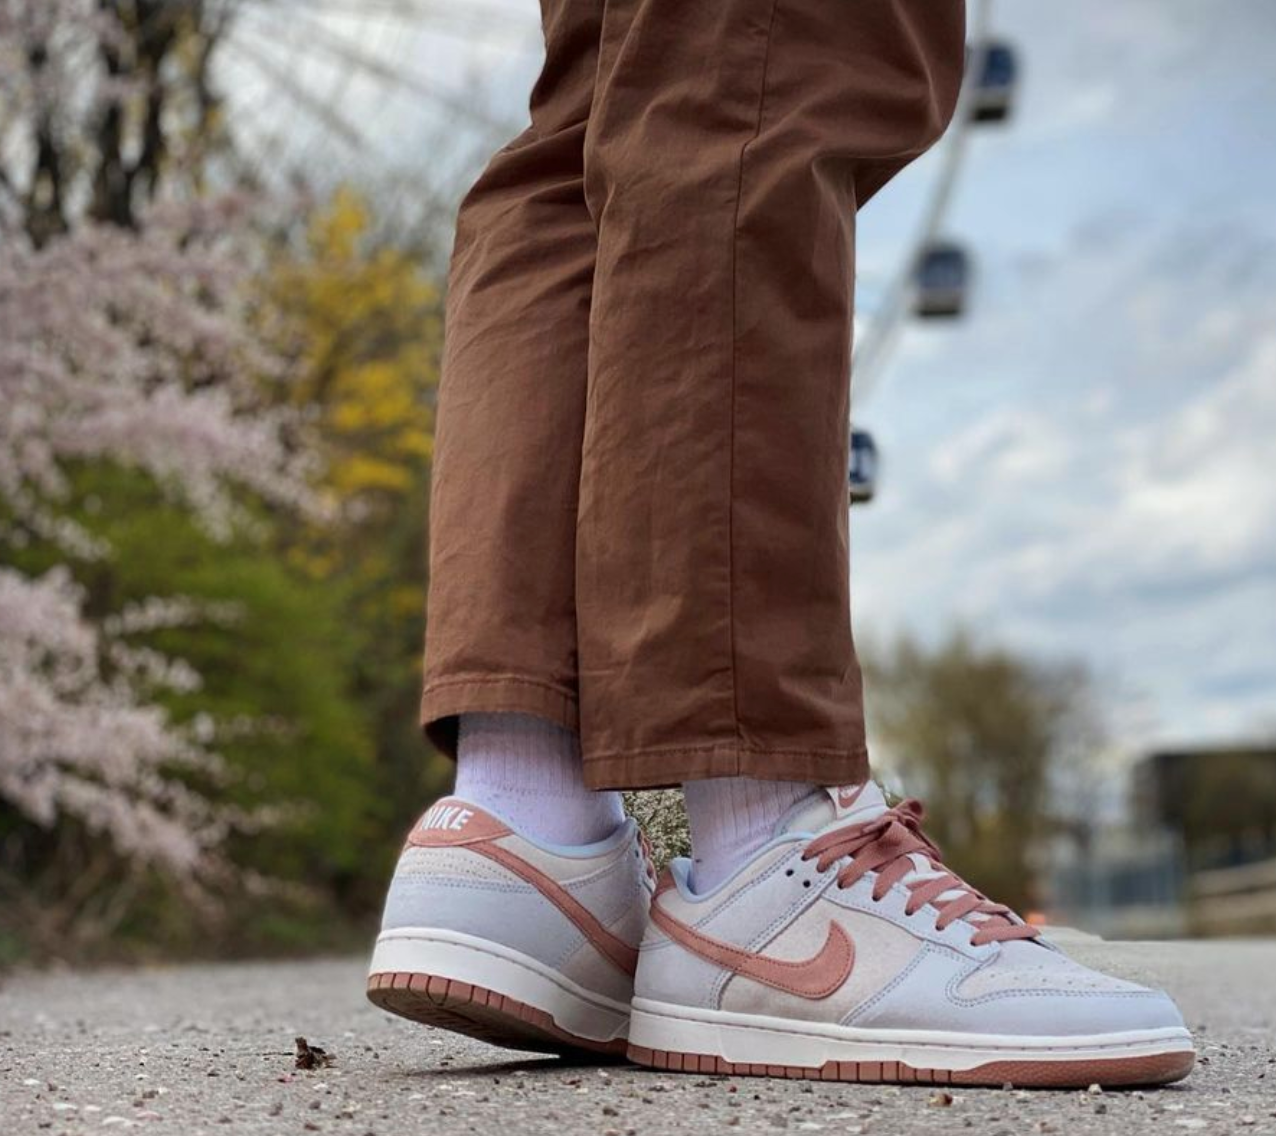 Nike Dunk Low 'Fossil Rose' DH7577-001 - DH7577-001 - Novelship